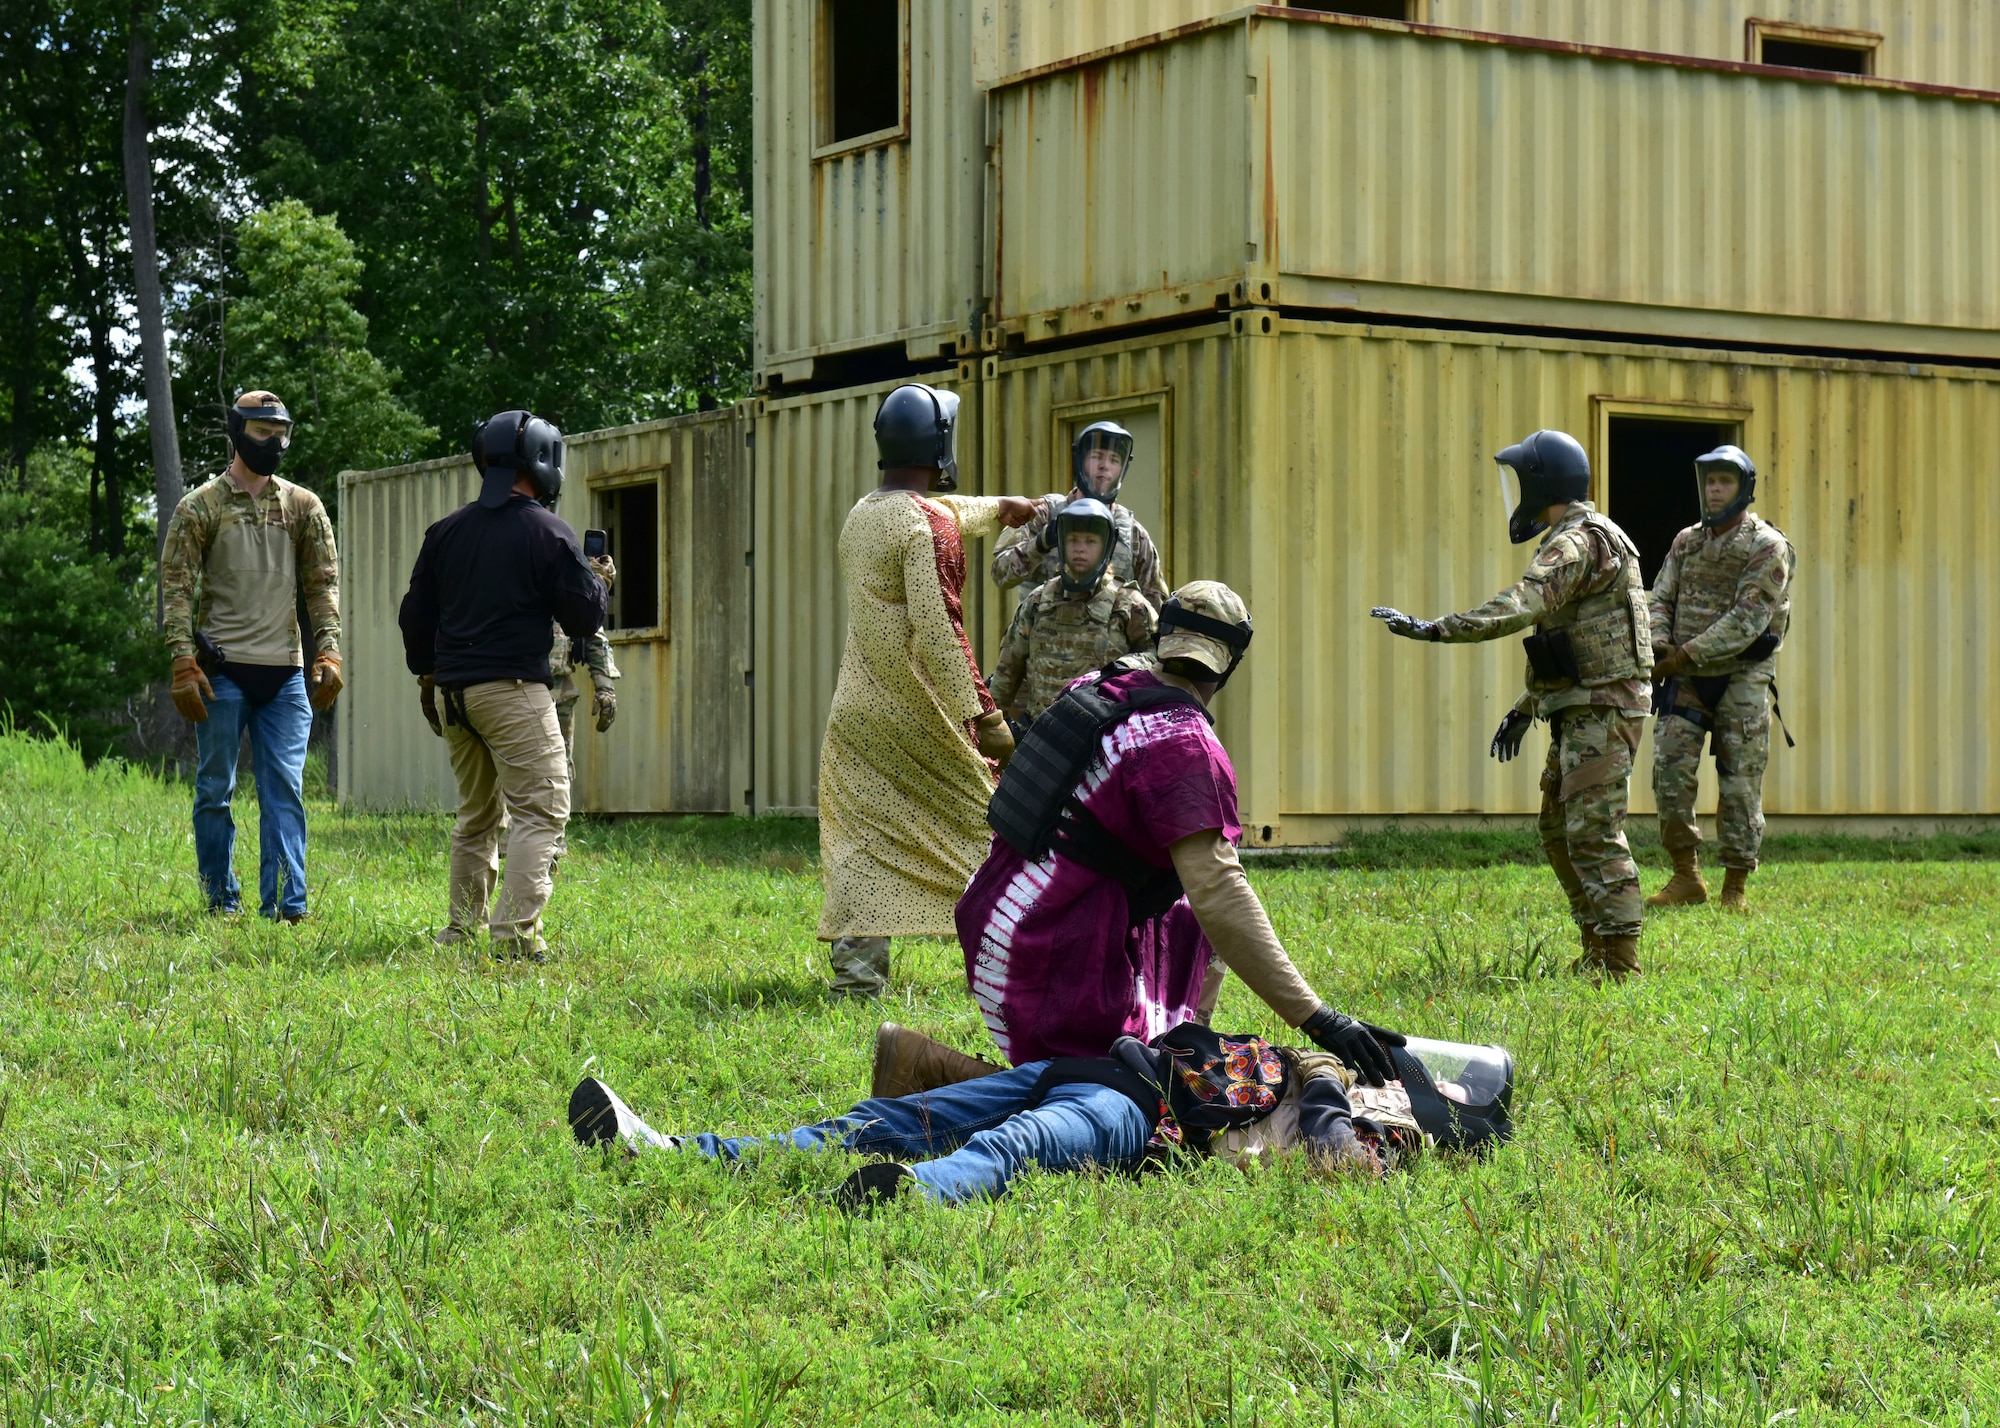 Instructors from the 421st Combat Training Squadron and Judge Advocate Airmen from Joint Base McGuire-Dix-Lakehurst, New Jersey, simulate a hostile scenario during the Fieldcraft Judge Advocate Course, Aug. 19, 2021. Trainees received scenario based escalation of force training, weapons familiarization, Islamic and host nation cultural training and sister service customs. (U.S. Air Force photo by Staff Sgt. Jake Carter)